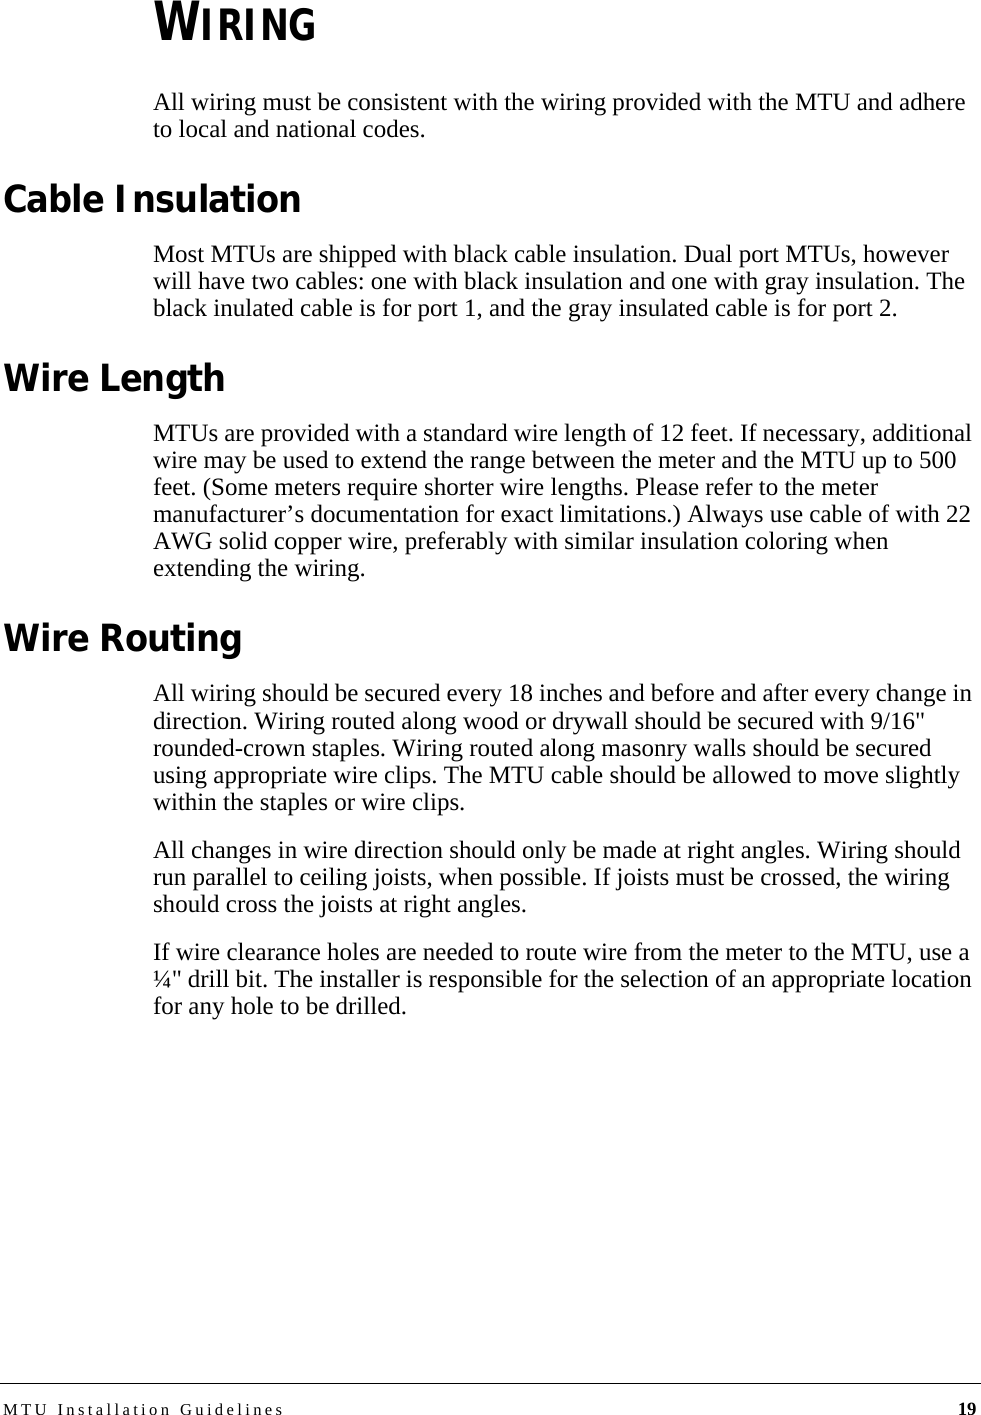 MTU Installation Guidelines 19WIRINGAll wiring must be consistent with the wiring provided with the MTU and adhere to local and national codes.Cable InsulationMost MTUs are shipped with black cable insulation. Dual port MTUs, however will have two cables: one with black insulation and one with gray insulation. The black inulated cable is for port 1, and the gray insulated cable is for port 2.Wire LengthMTUs are provided with a standard wire length of 12 feet. If necessary, additional wire may be used to extend the range between the meter and the MTU up to 500 feet. (Some meters require shorter wire lengths. Please refer to the meter manufacturer’s documentation for exact limitations.) Always use cable of with 22 AWG solid copper wire, preferably with similar insulation coloring when extending the wiring.Wire RoutingAll wiring should be secured every 18 inches and before and after every change in direction. Wiring routed along wood or drywall should be secured with 9/16&quot; rounded-crown staples. Wiring routed along masonry walls should be secured using appropriate wire clips. The MTU cable should be allowed to move slightly within the staples or wire clips.All changes in wire direction should only be made at right angles. Wiring should run parallel to ceiling joists, when possible. If joists must be crossed, the wiring should cross the joists at right angles.If wire clearance holes are needed to route wire from the meter to the MTU, use a ¼&quot; drill bit. The installer is responsible for the selection of an appropriate location for any hole to be drilled.